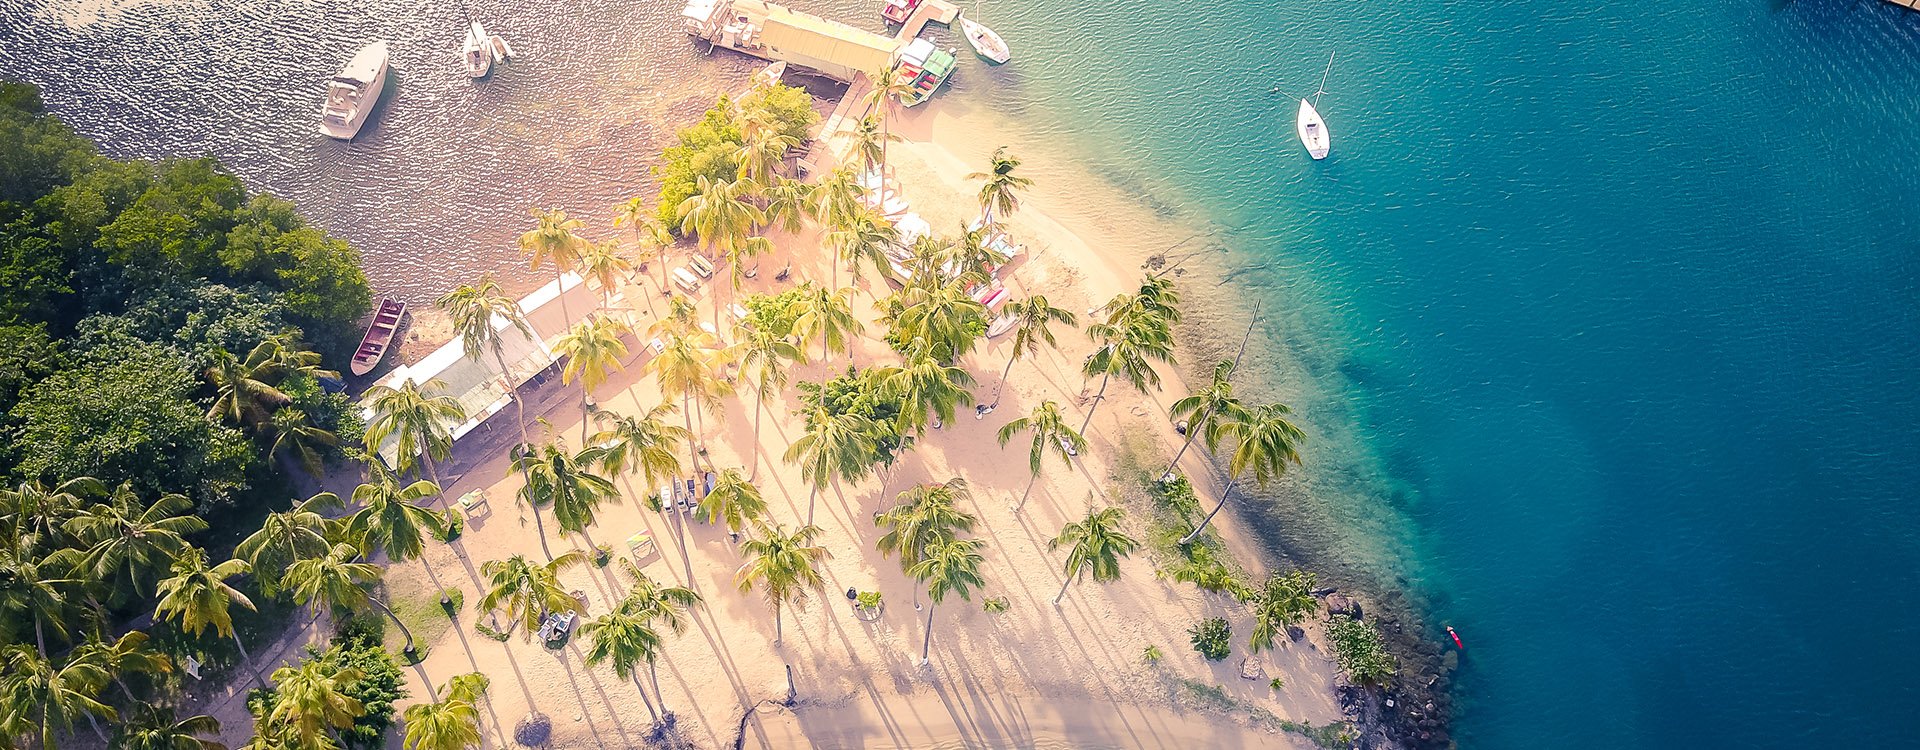 Aerial view of Marigot bay in St Lucia